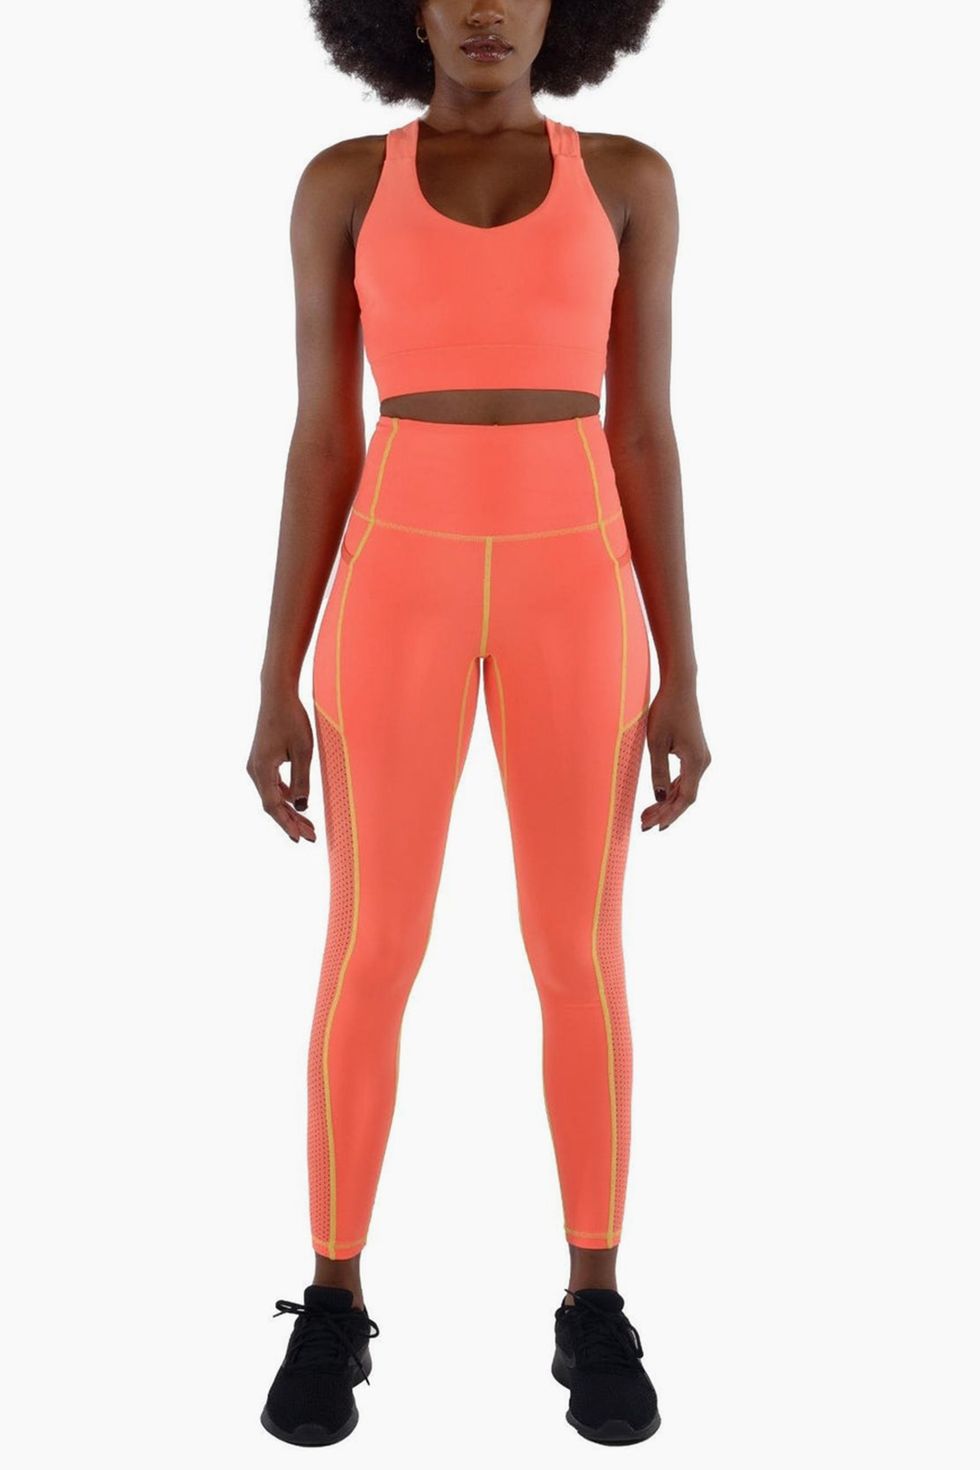 Stay Fit and Stylish with Gymshark Cropped Leggings in Orange